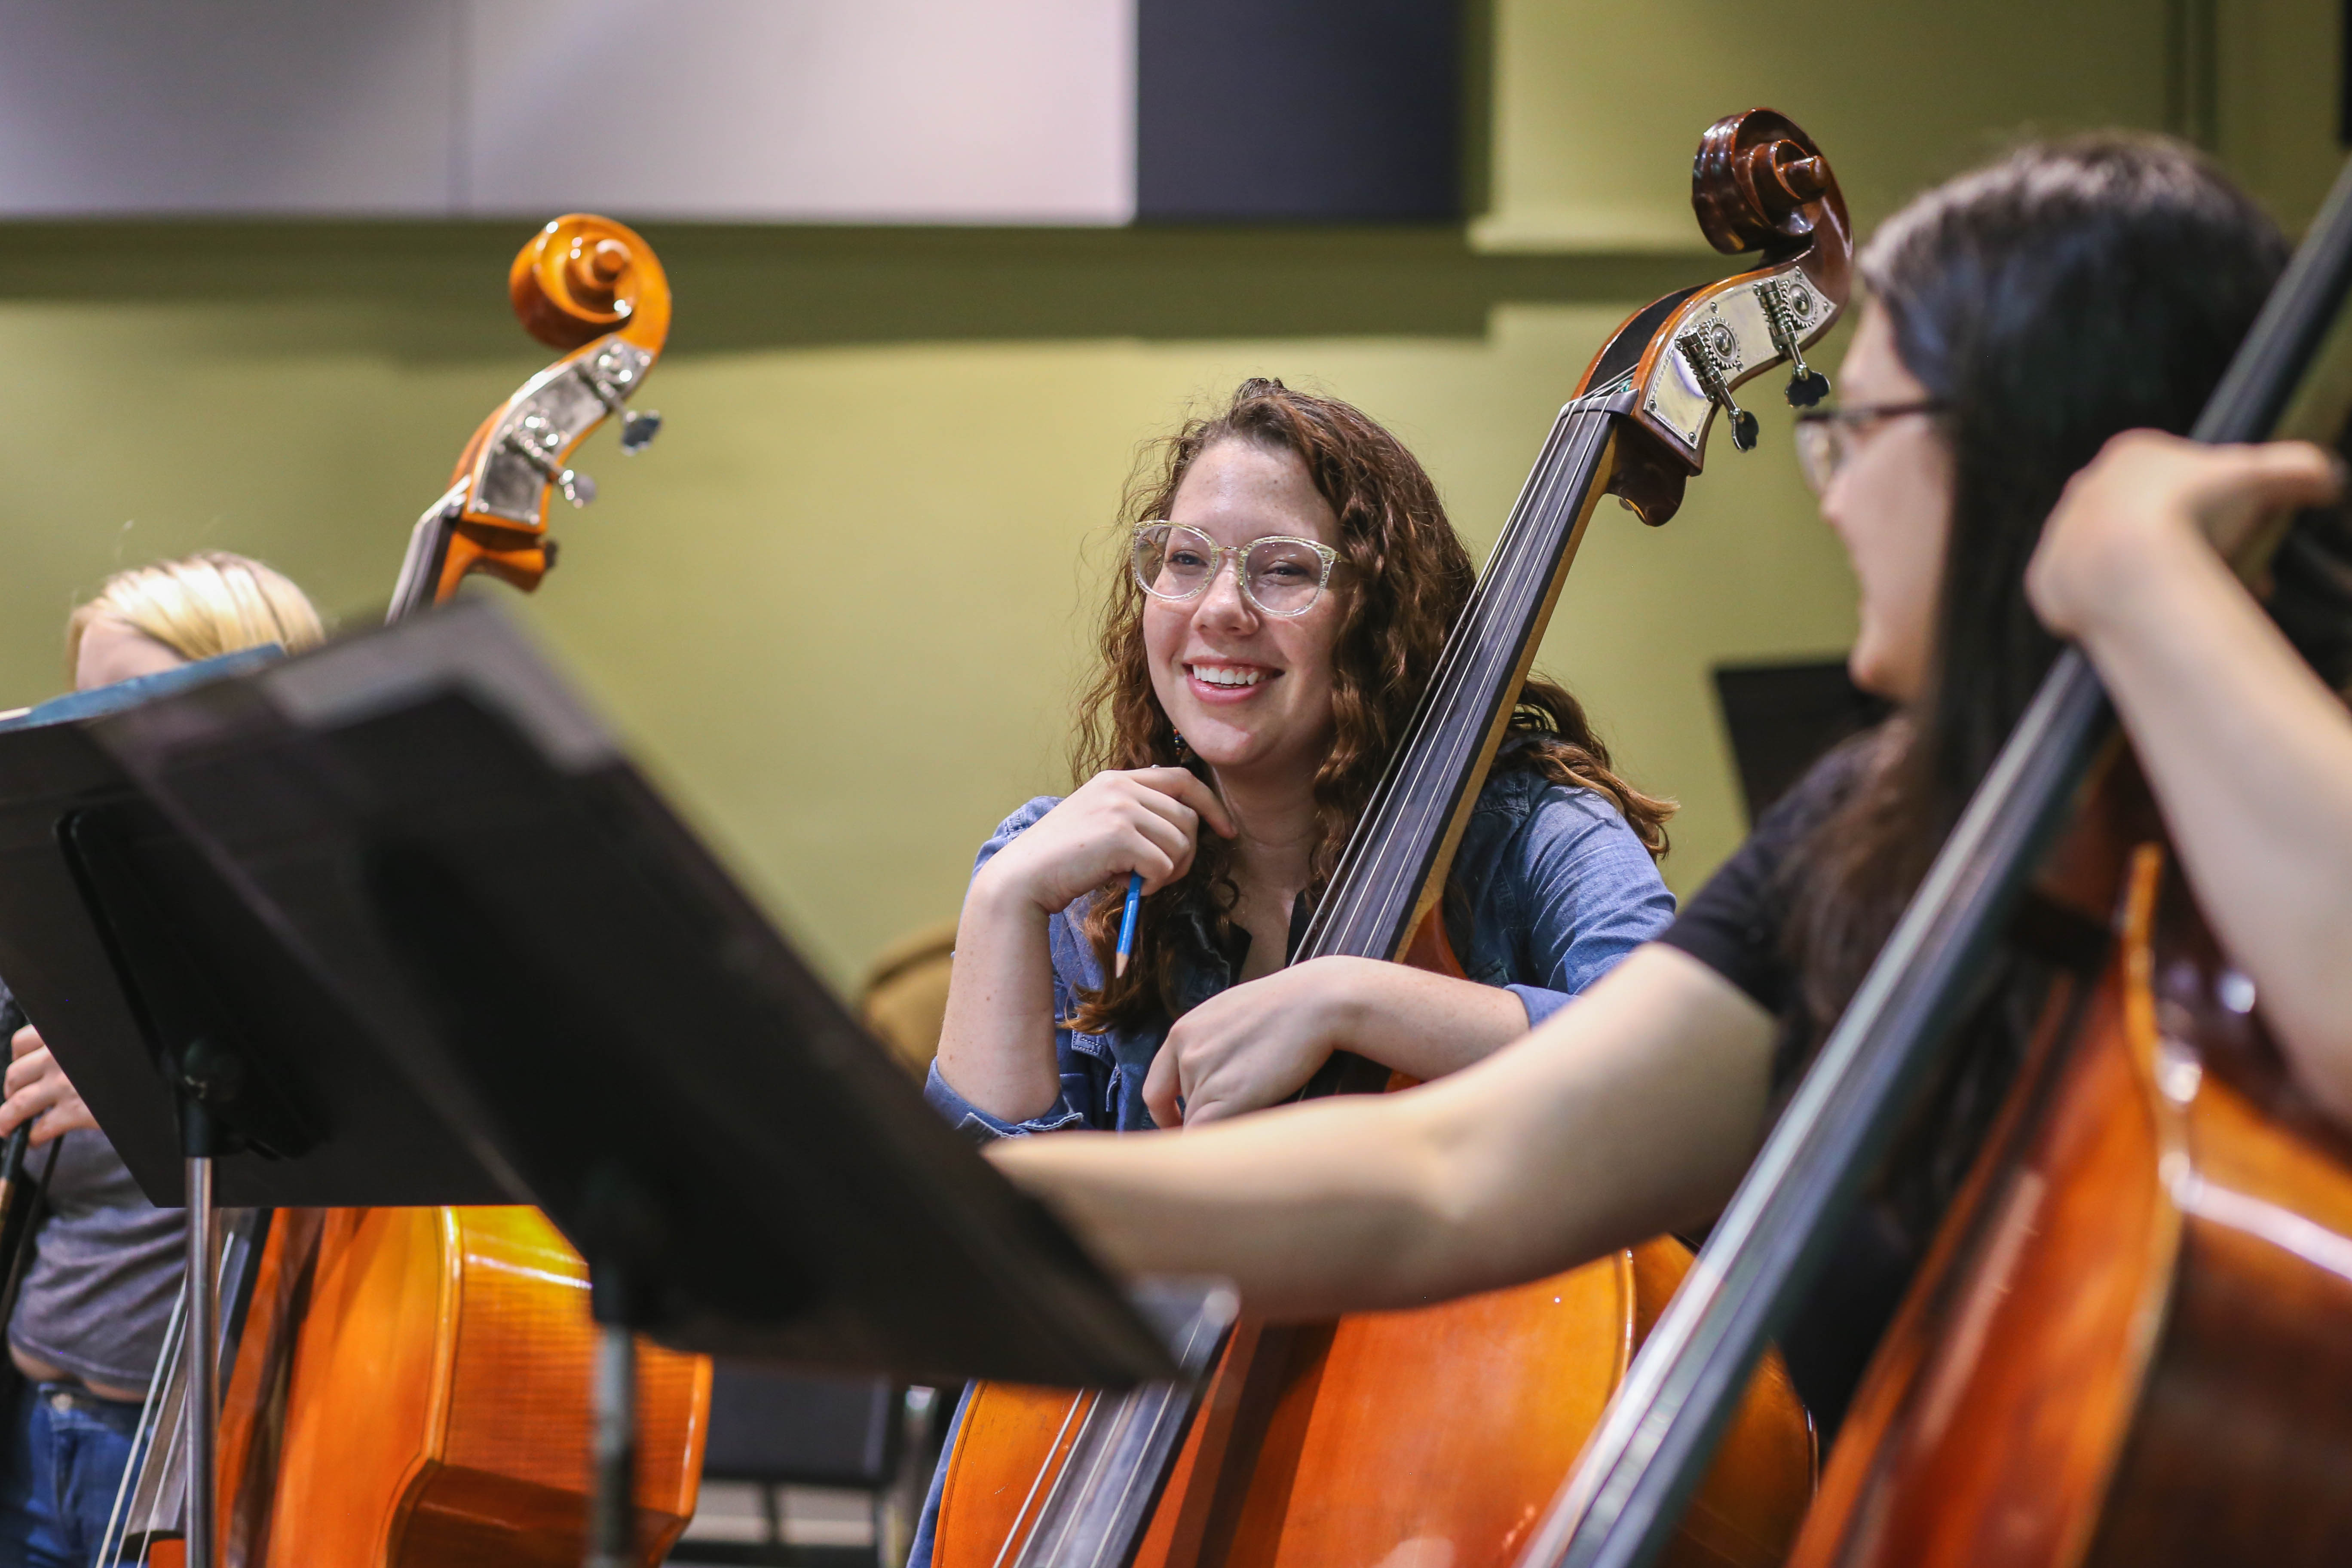 A student plays in an orchestral ensemble